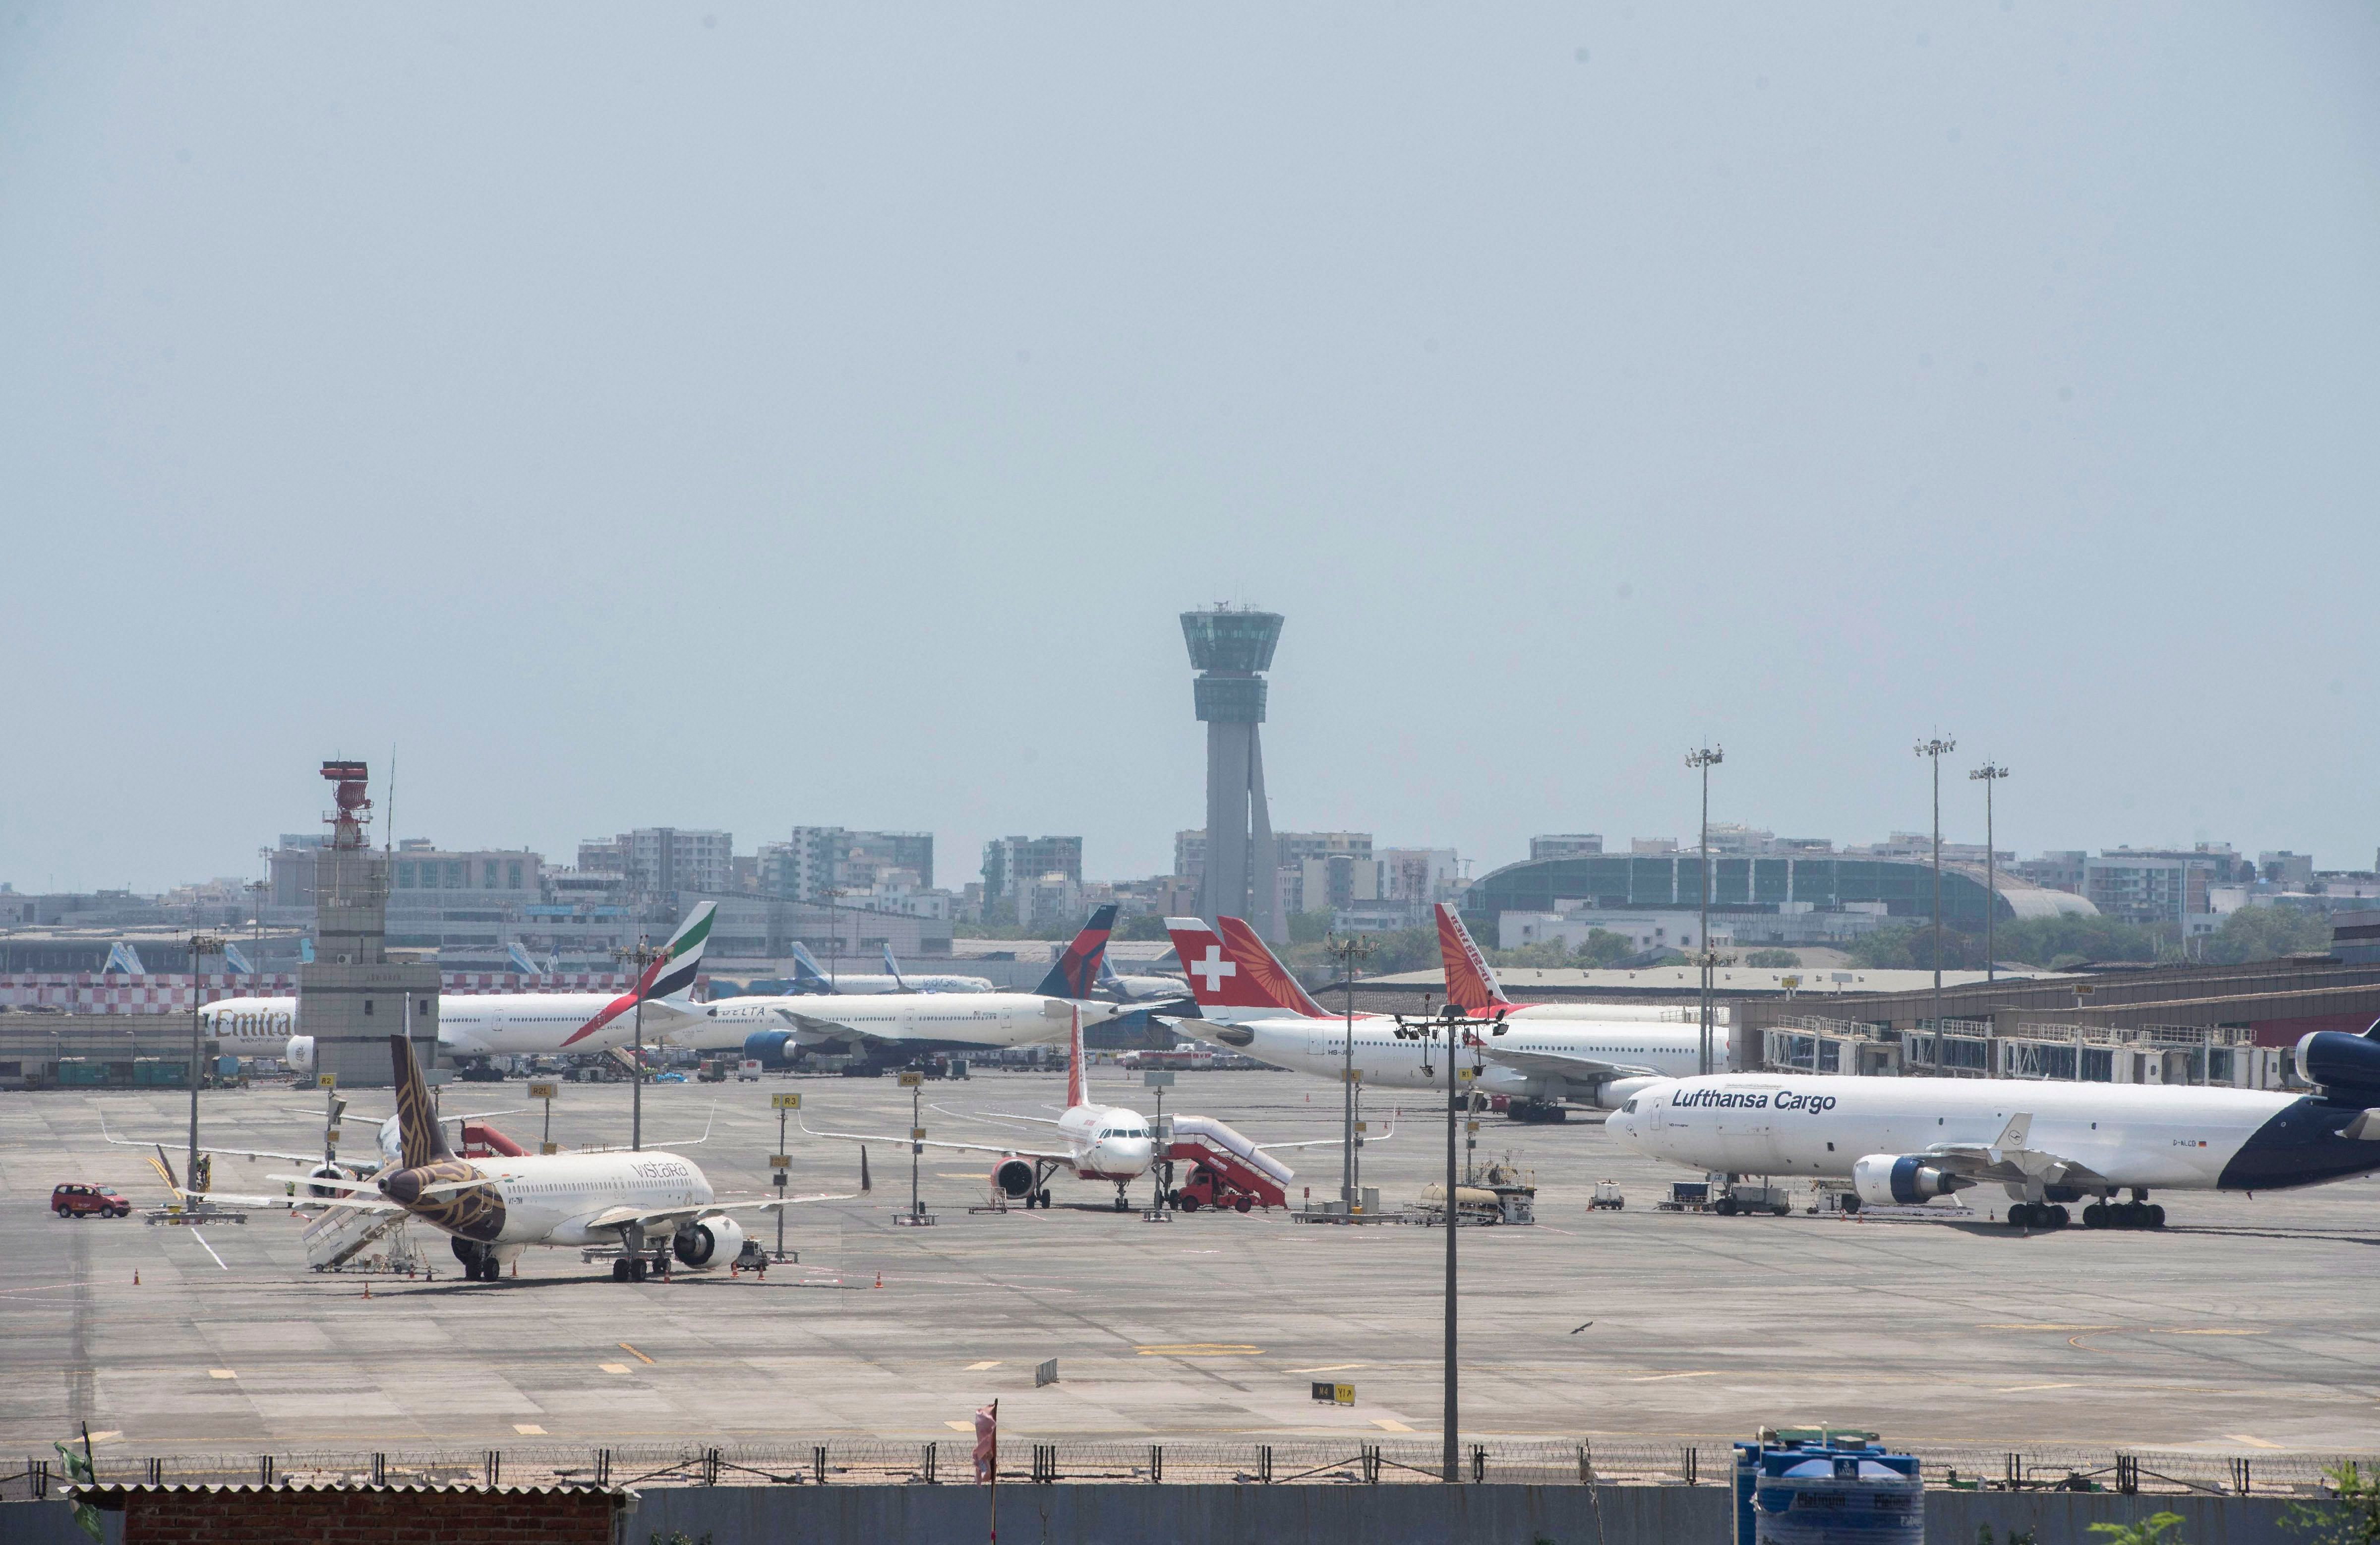 "The Mumbai International Airport will operate 25 flights in and out on daily basis starting Monday onwards. The number of flights will be increased steadily," Malik told news channels. (Credit: PTI Photo)